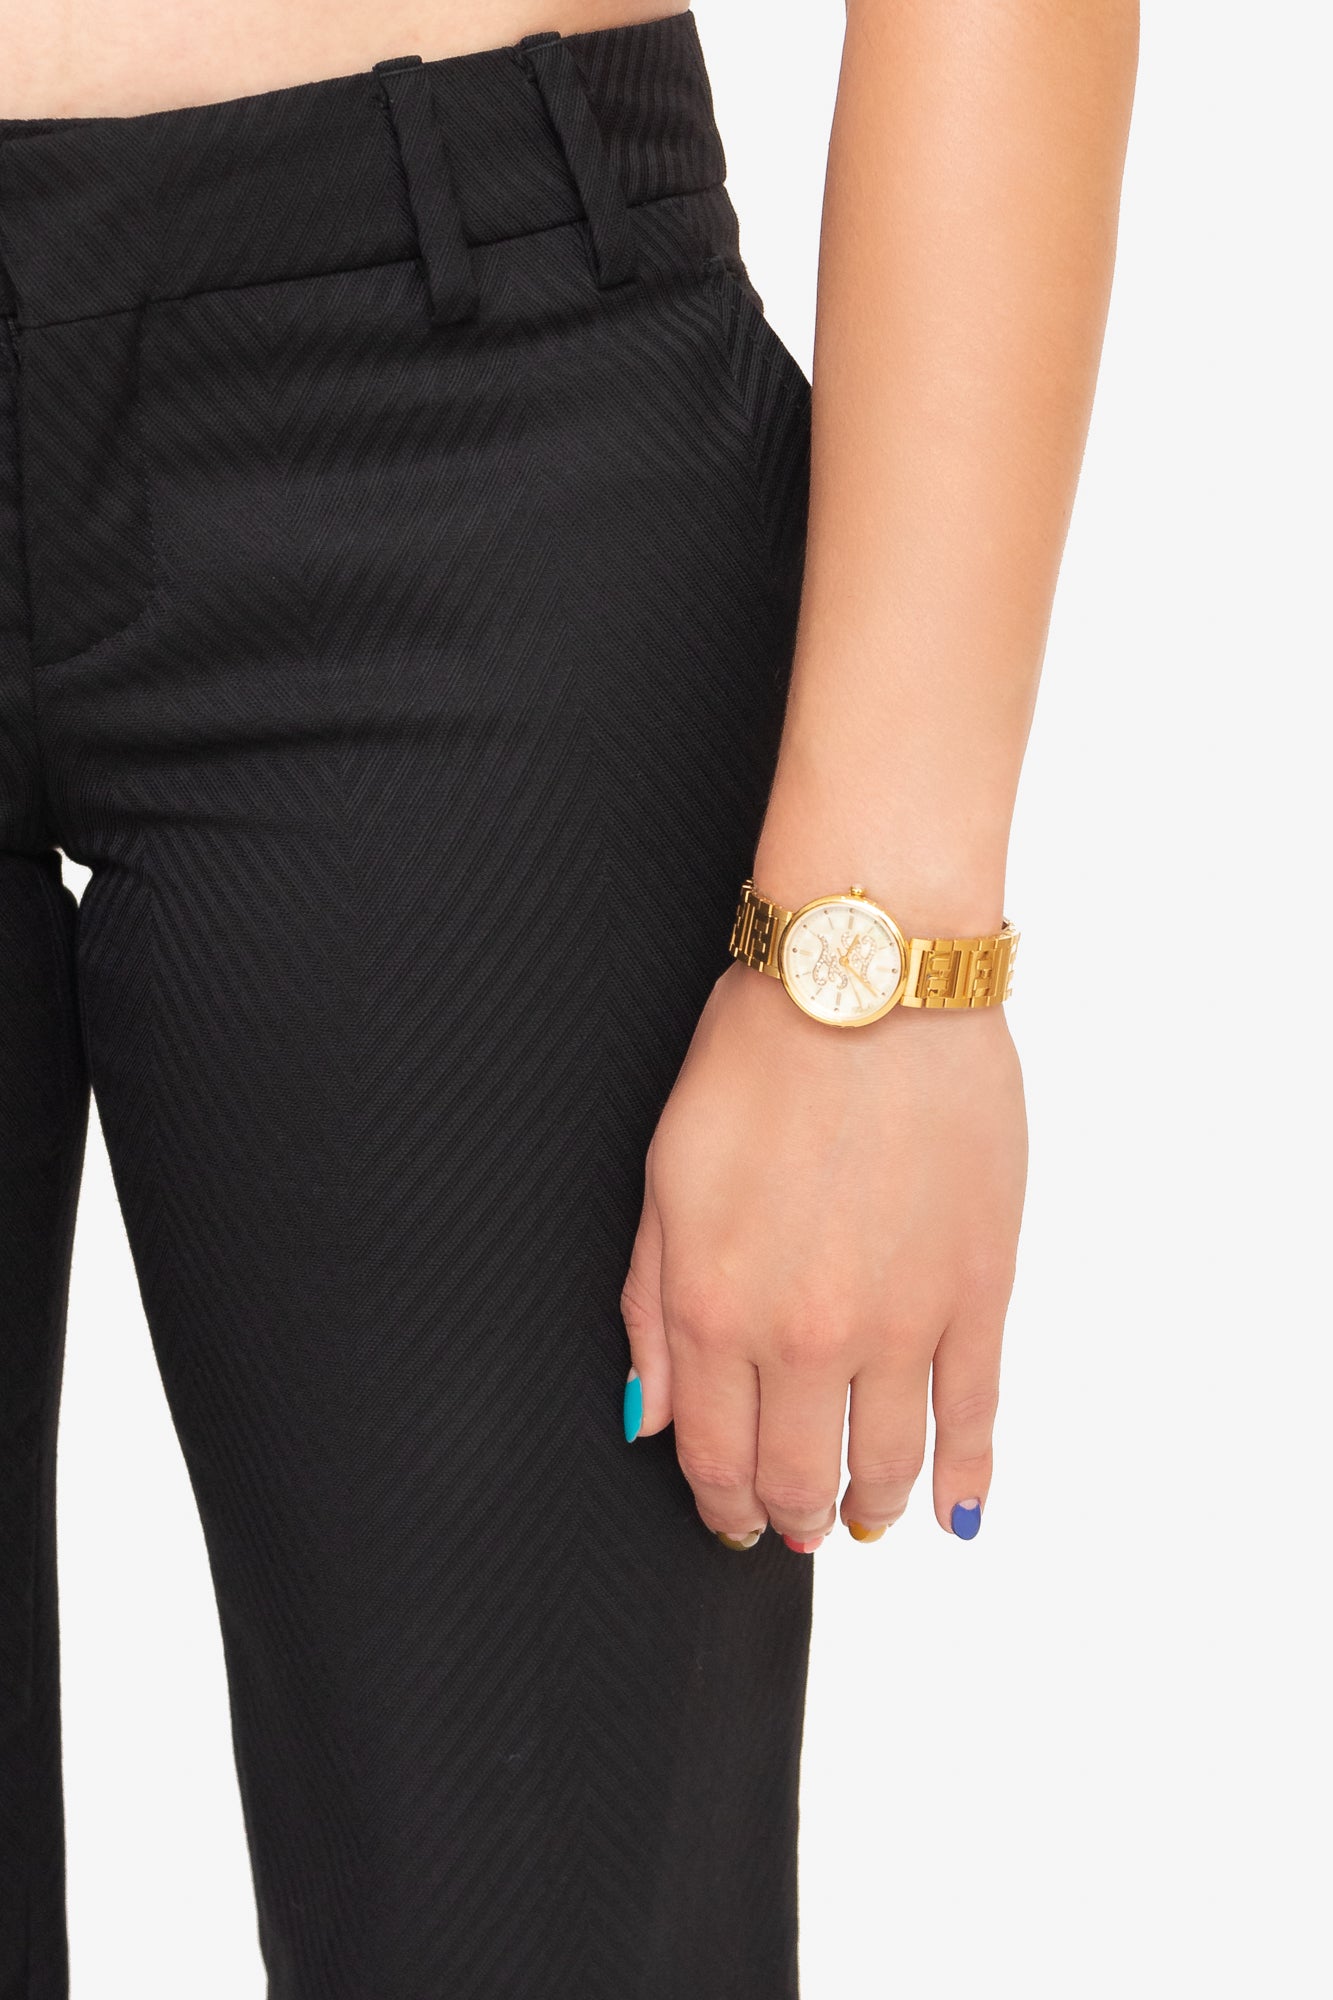 Gold Forever Fendi Watch